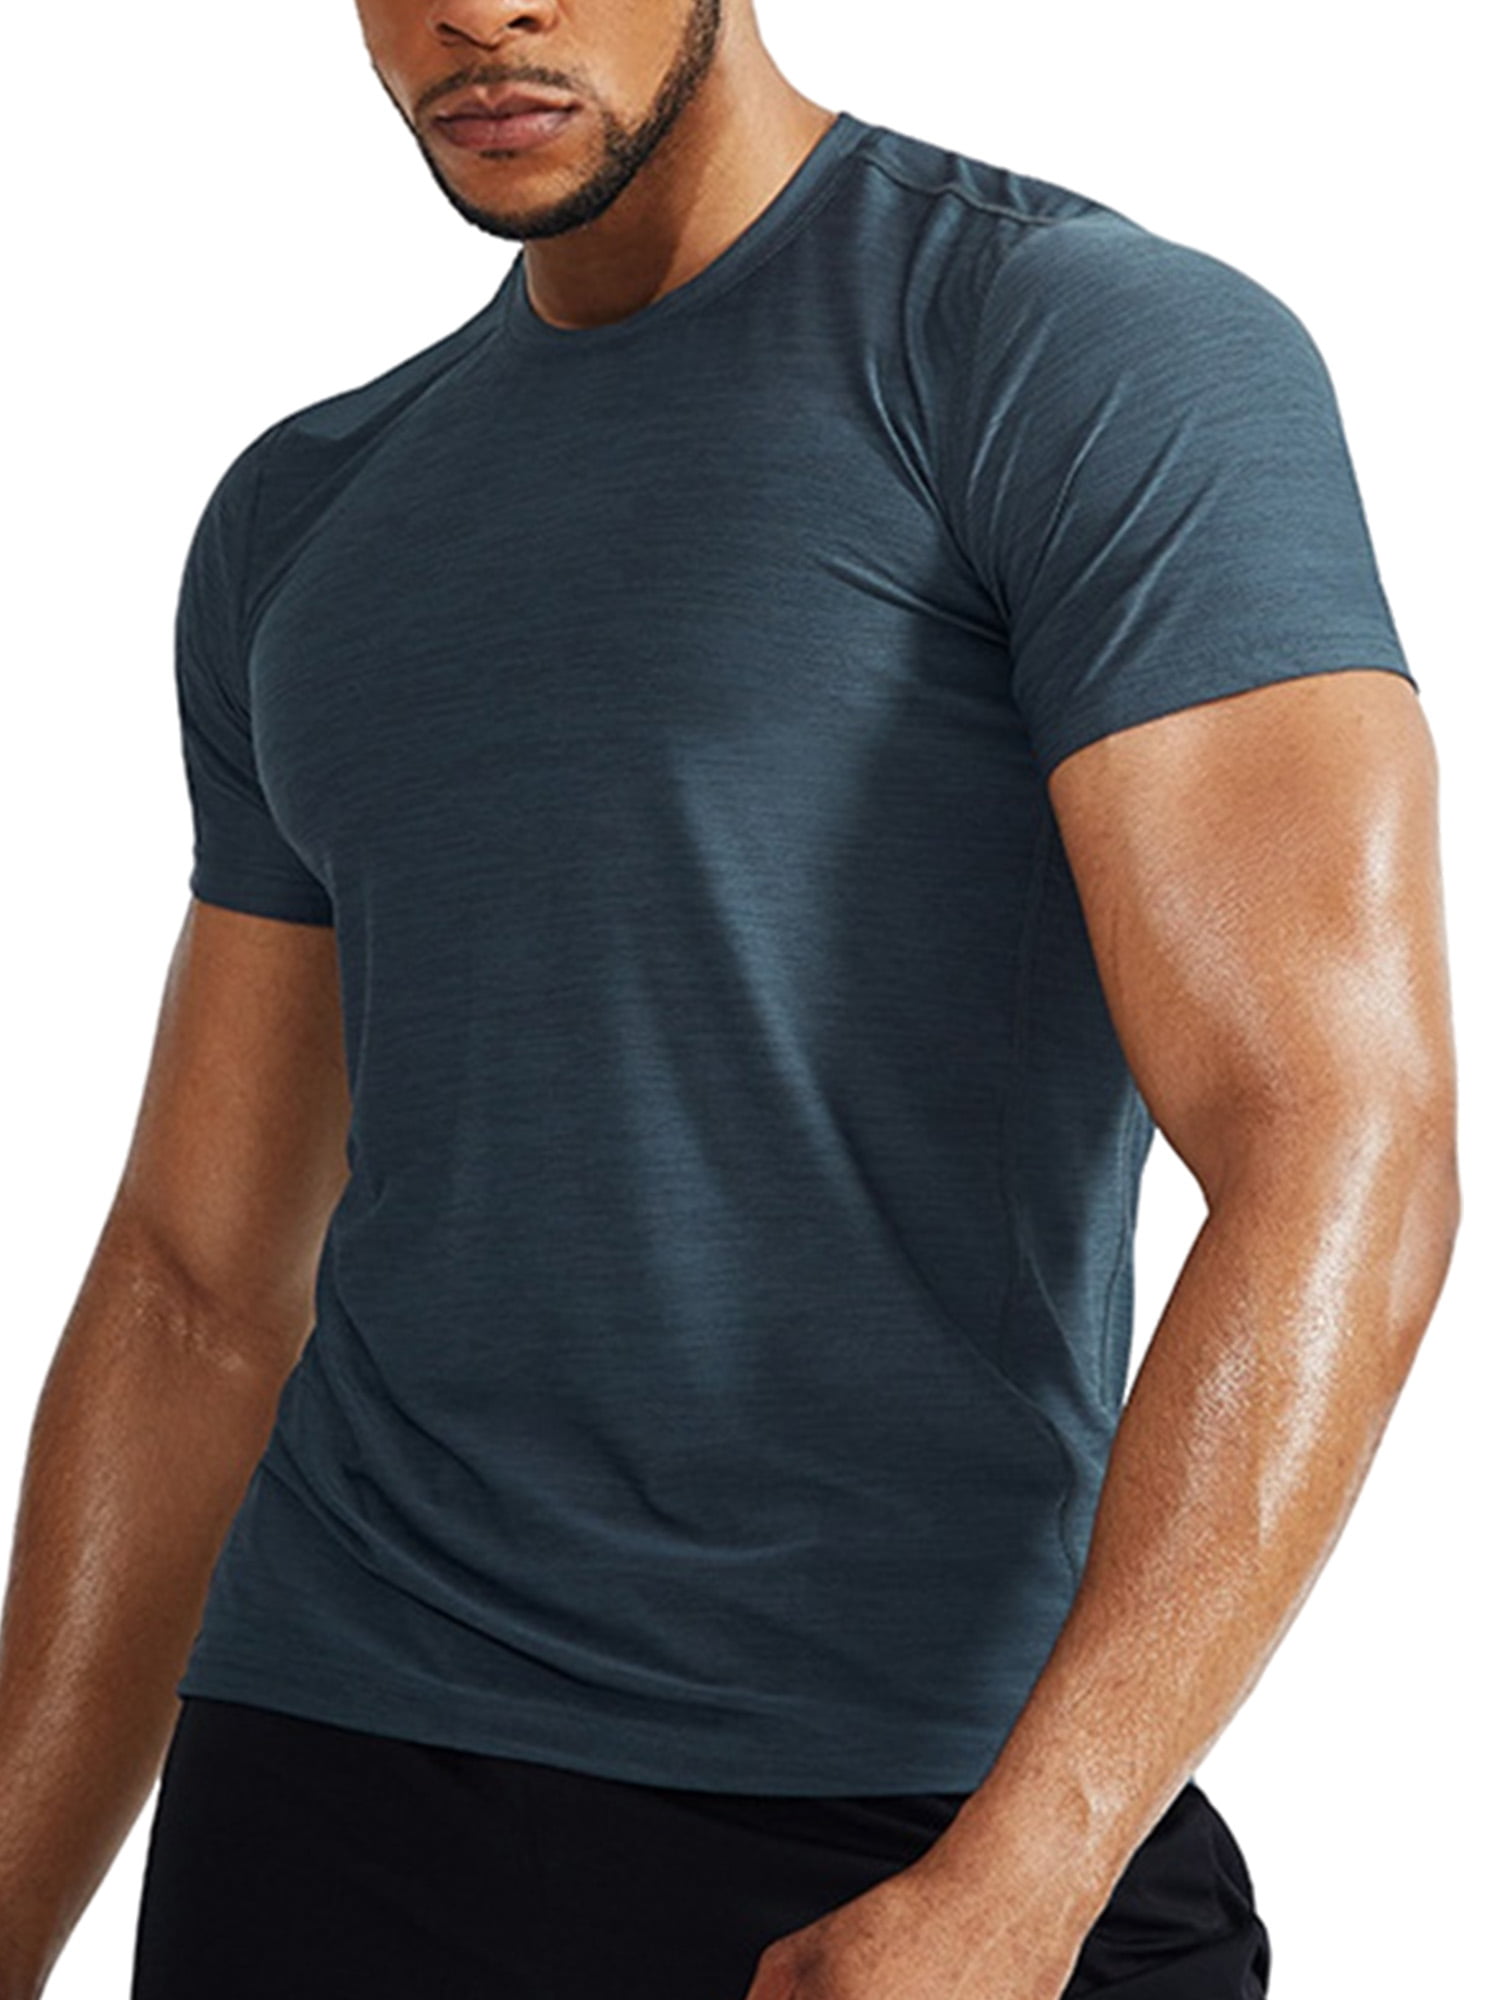 Dry Fit Athletic Shirts for Men Short Sleeve Workout Shirt 